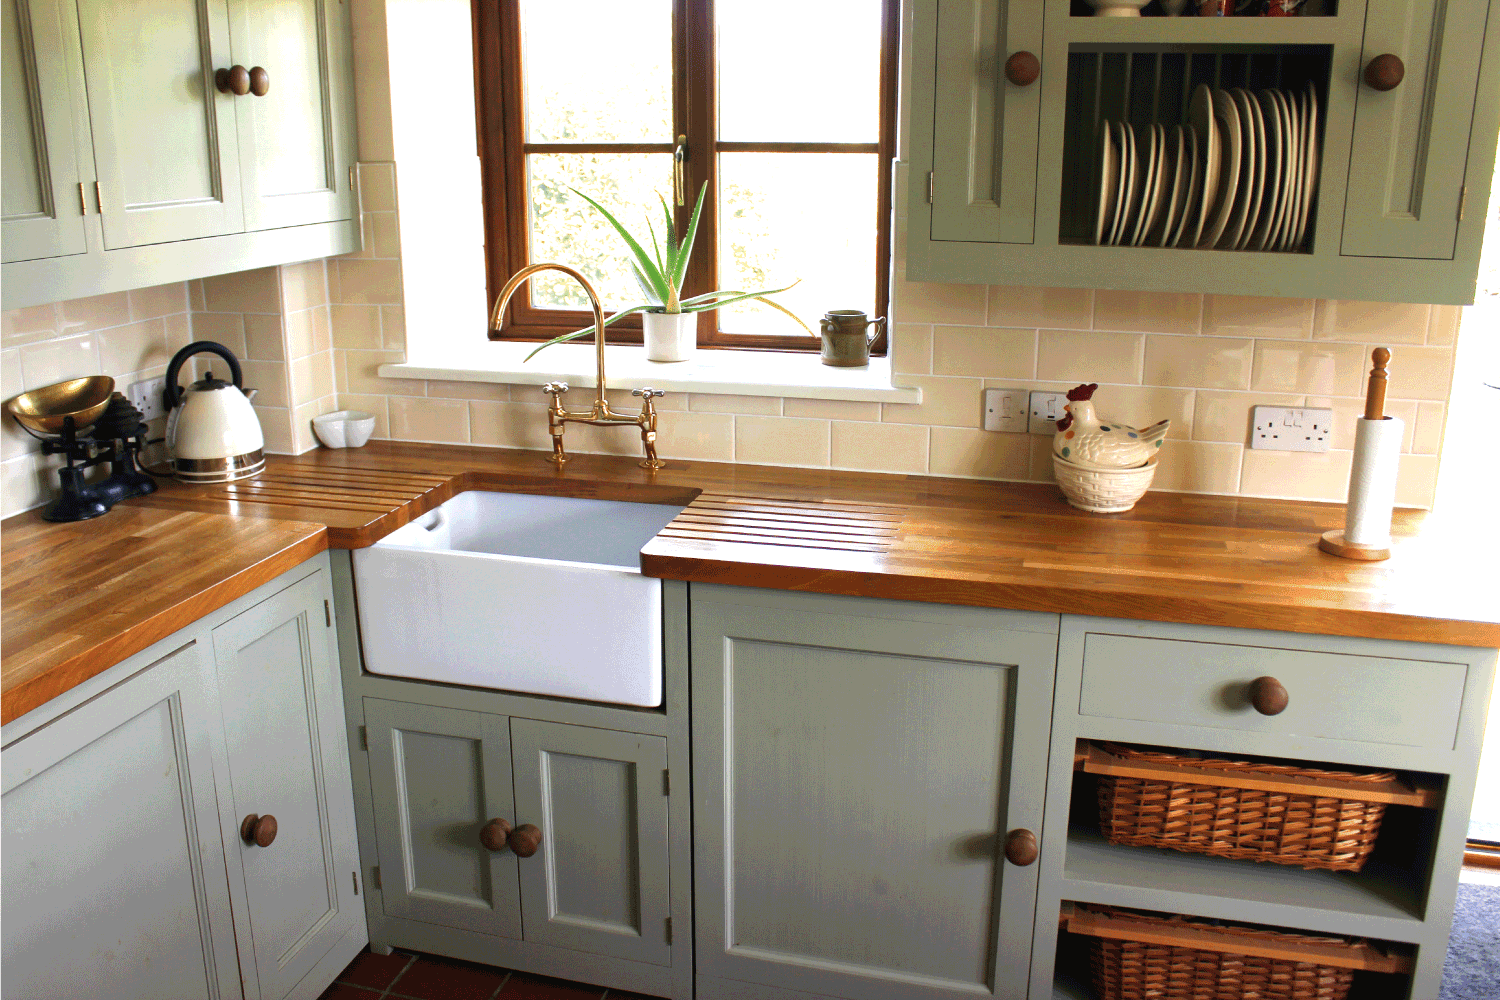  traditional country kitchen, with a large range cooker with gas hob, duck egg green cupboards and wall cabinets, a white ceramic sink